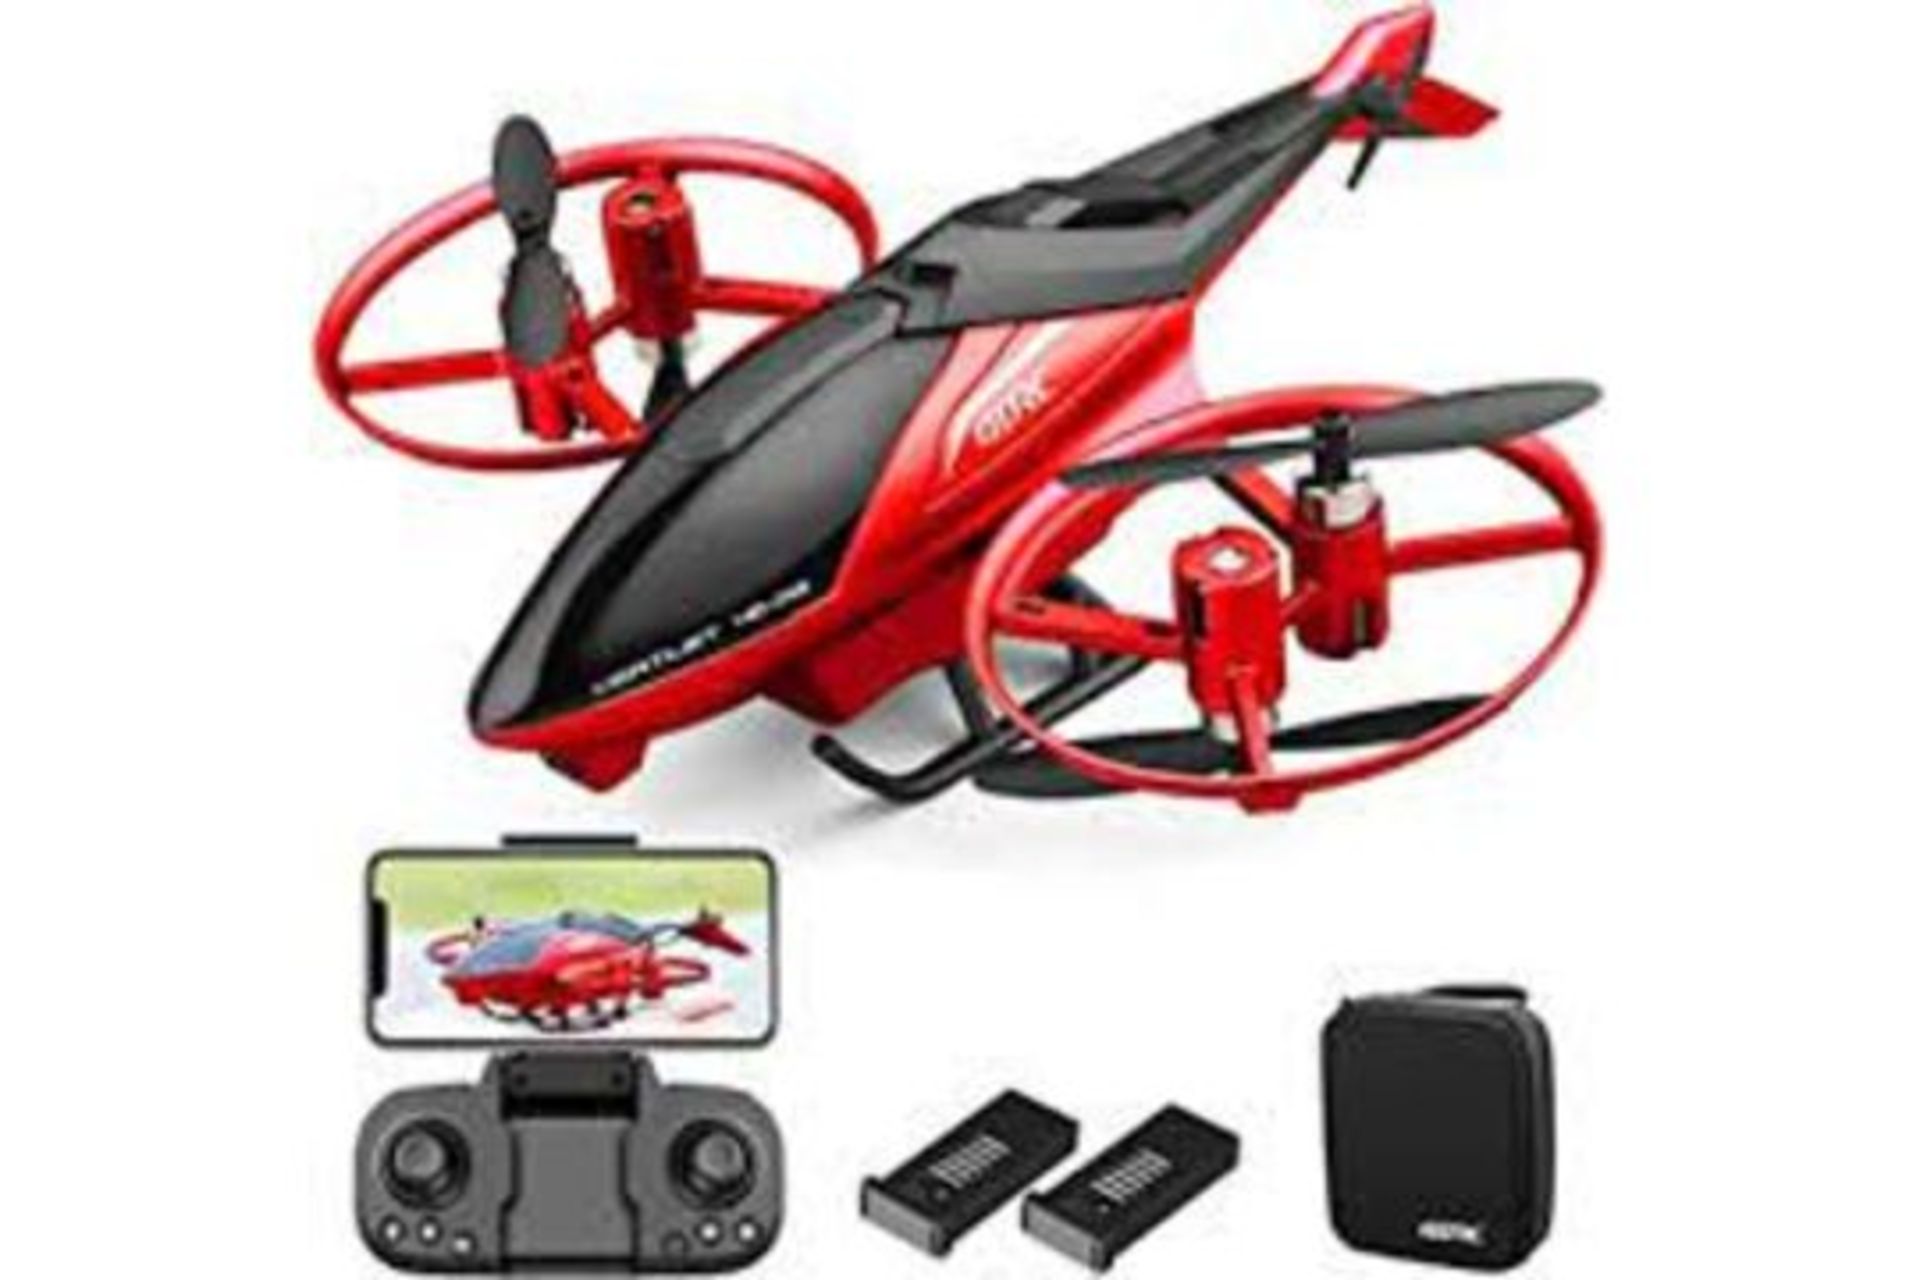 2 X 4DRC M3 Helicopter Mini Drone with 720p Camera for Kids, Remote Control Quadcopter Toys Gifts